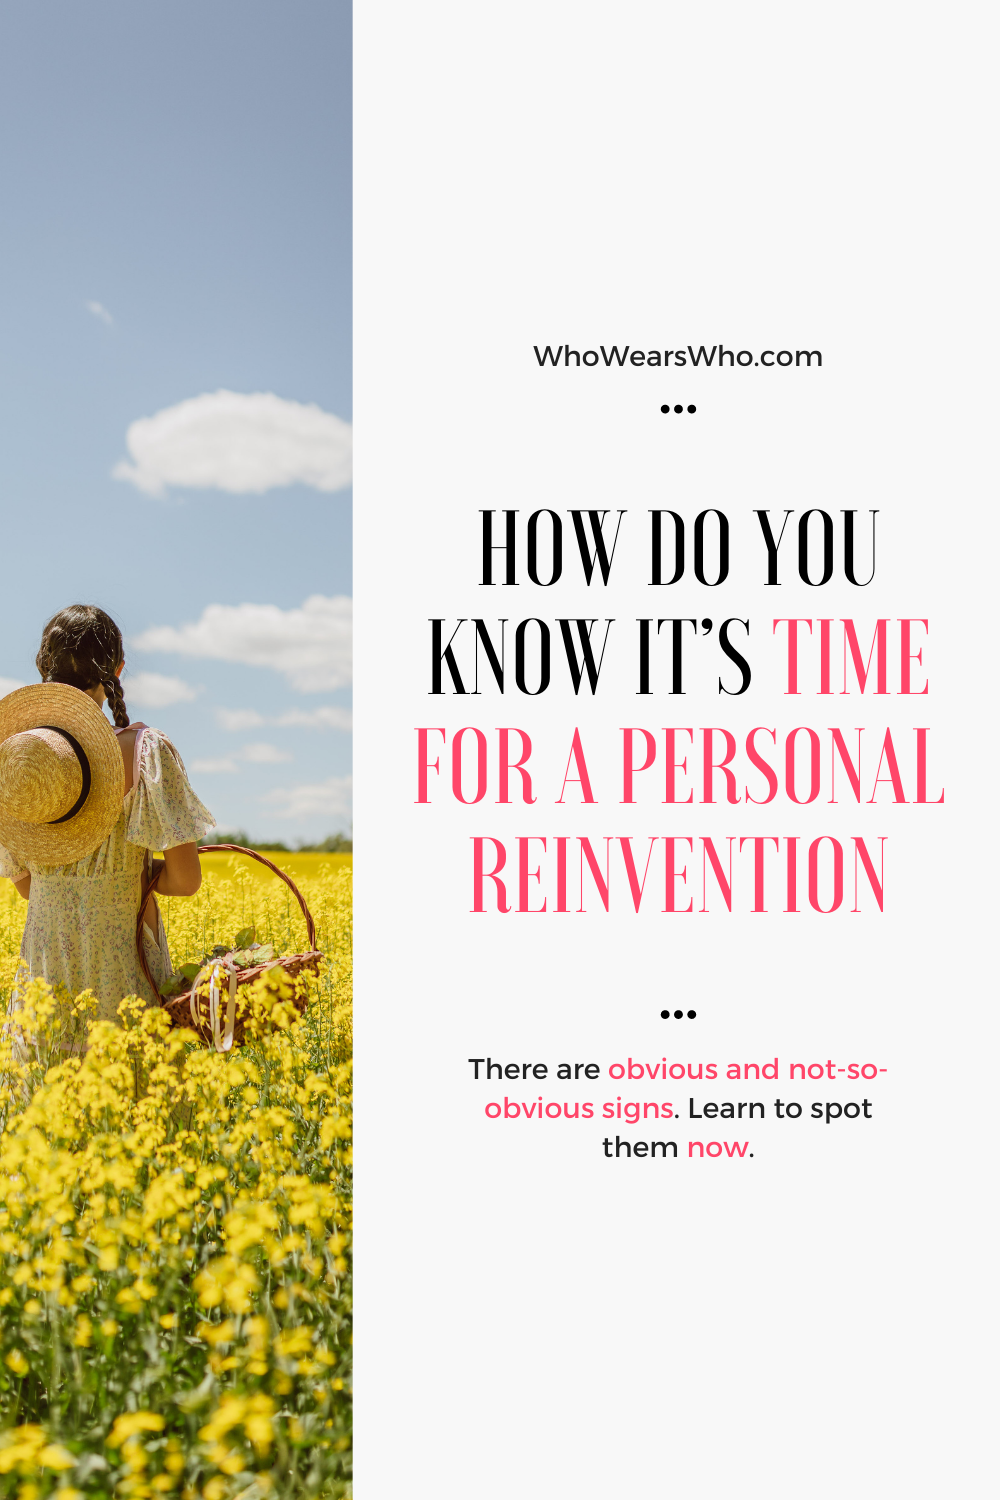 How do you know it’s time for a personal reinvention